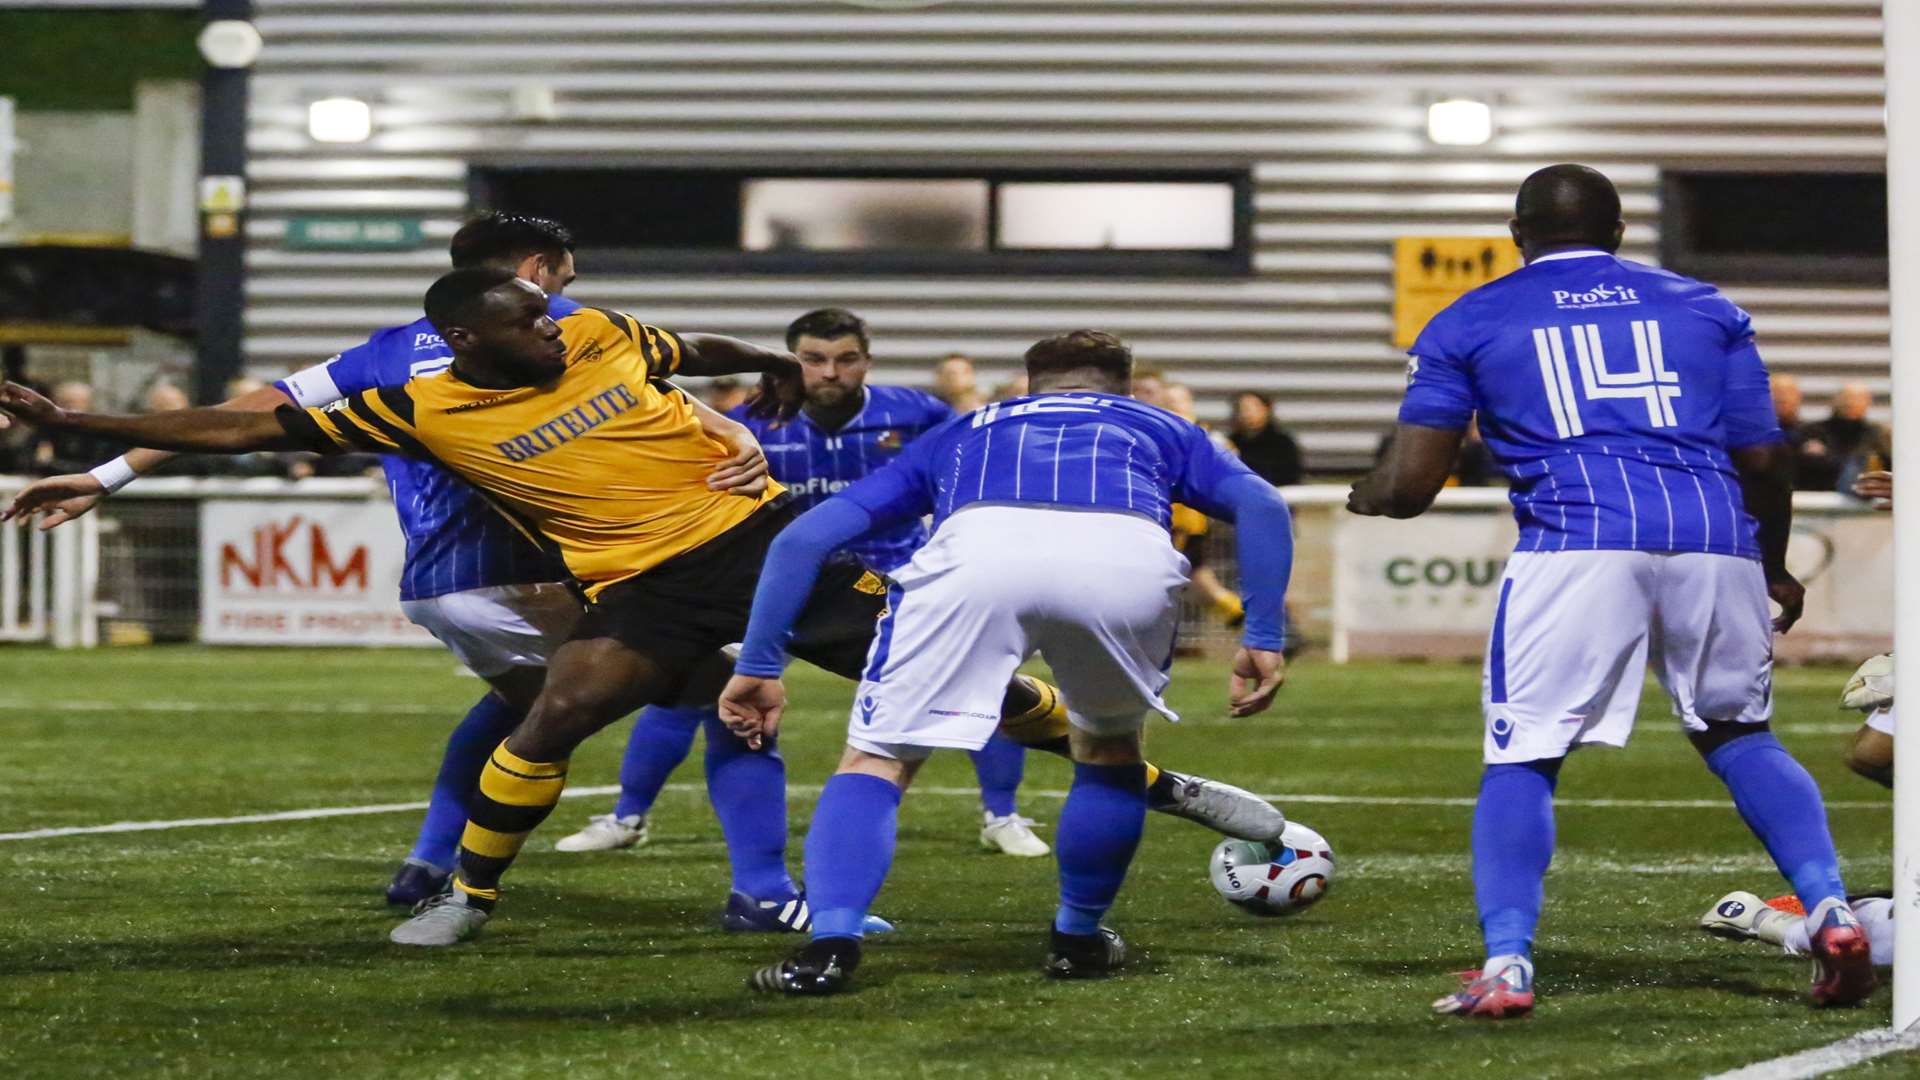 Manny Parry tries to force in a second goal for Maidstone Picture: Martin Apps